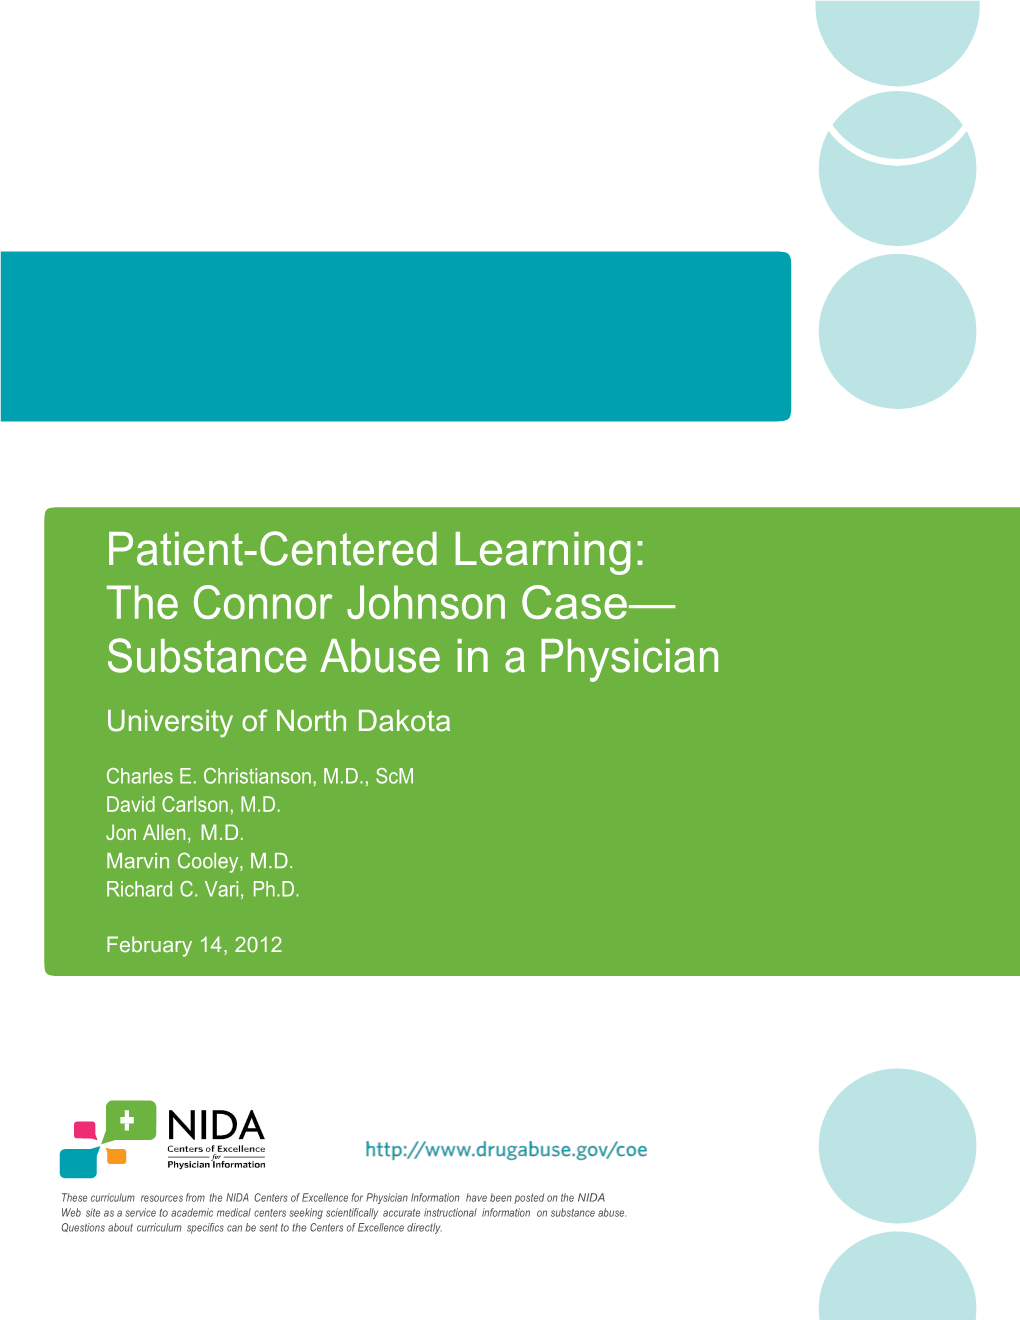 Patient-Centered Learning: the Connor Johnson Case Substance Abuse in a Physician